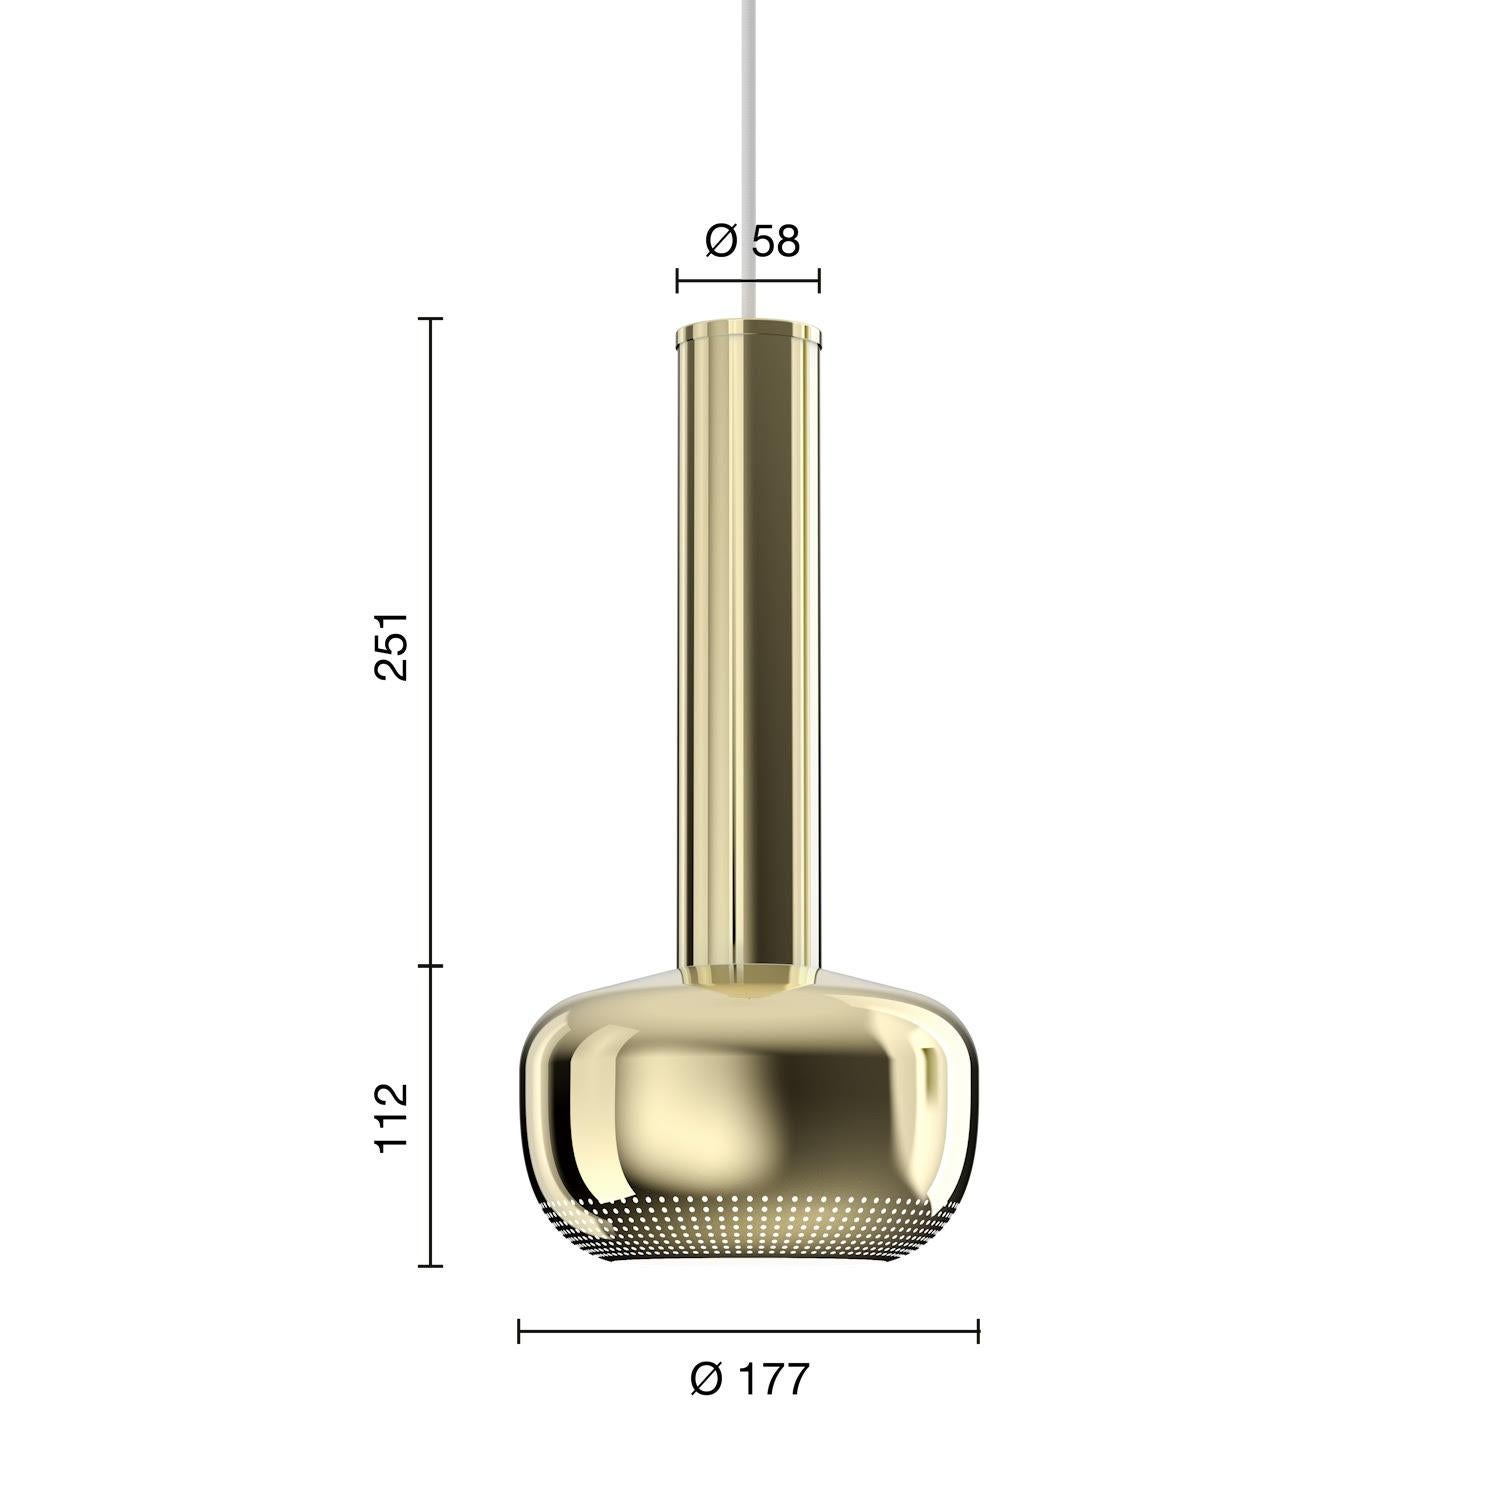 VL56 pendant lamp by Louis Poulsen
VL56 pendant lamp by Louis Poulsen in polished brass or chrome. Designer Vilhelm Lauritzen
 Please note that brass surfaces are not treated. This means that the surface will change over time and take on a